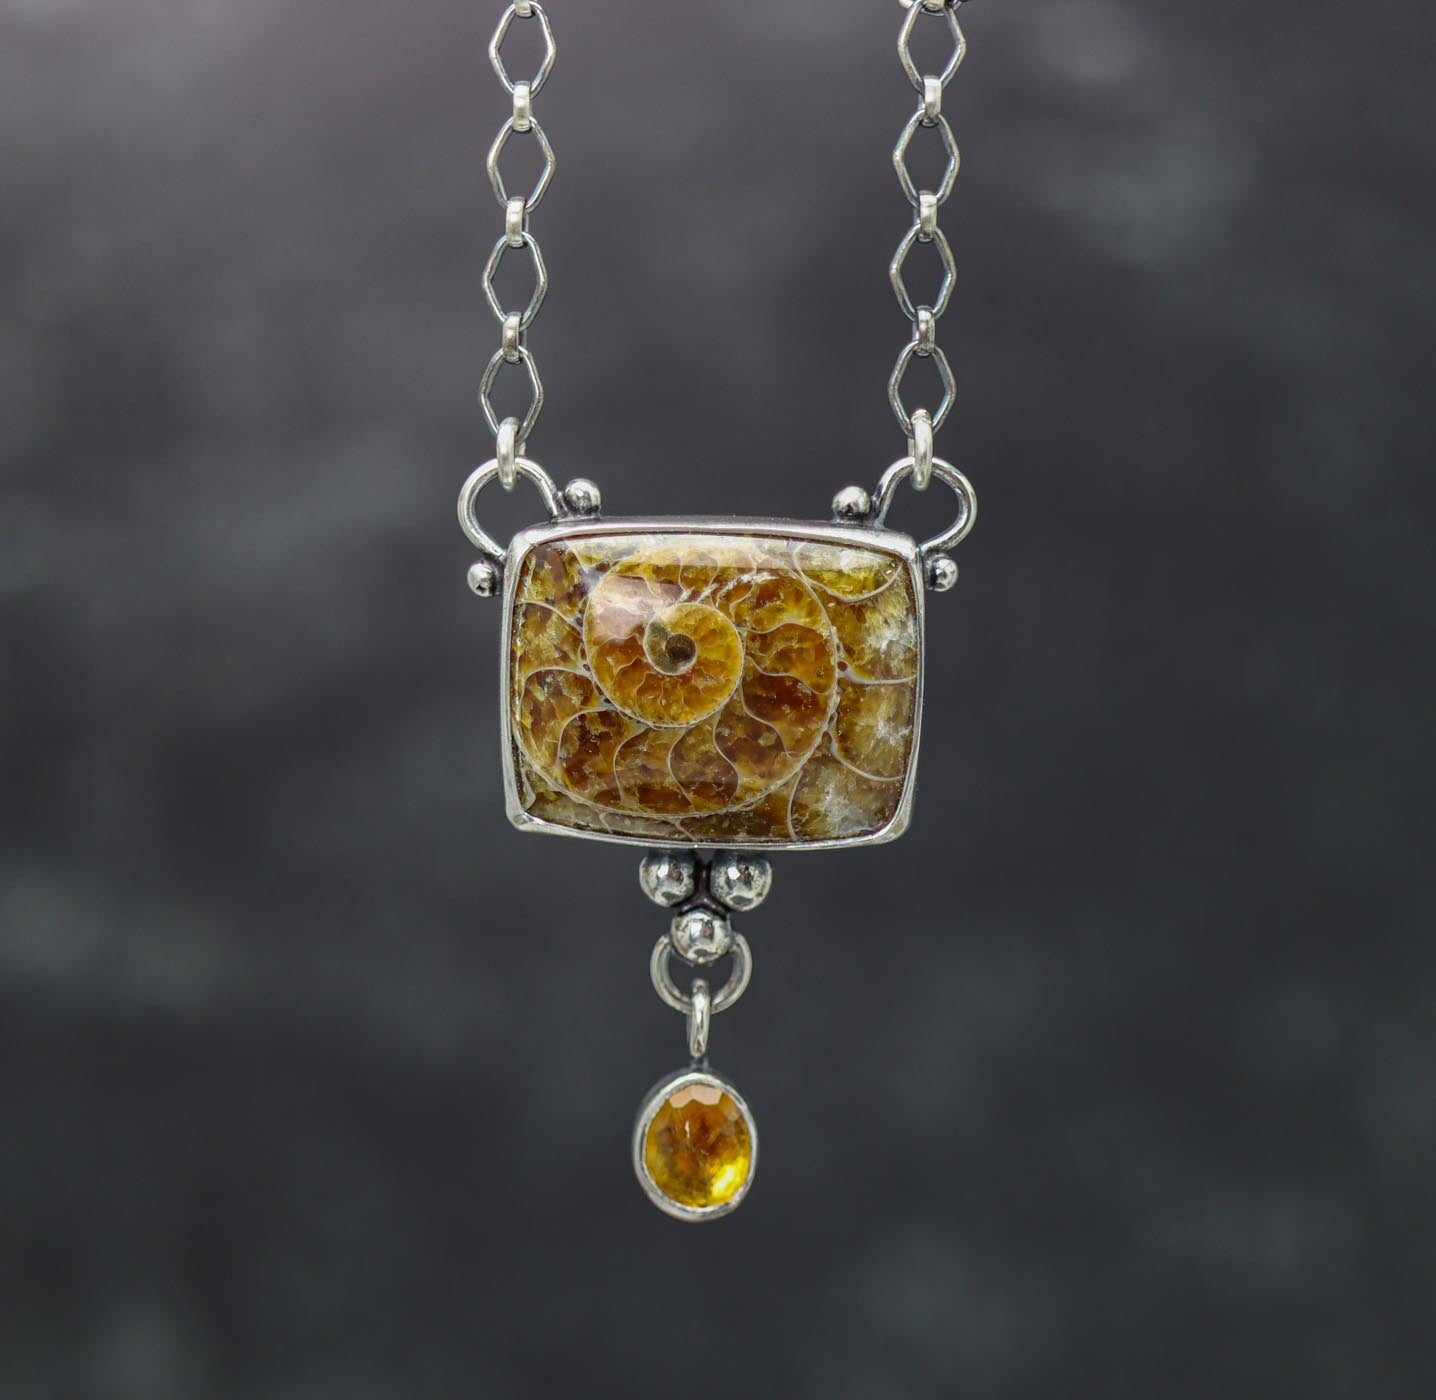 Ammonite Fossil and Citrine Pendant Sterling Silver One Of a Kind Gemstone Necklace